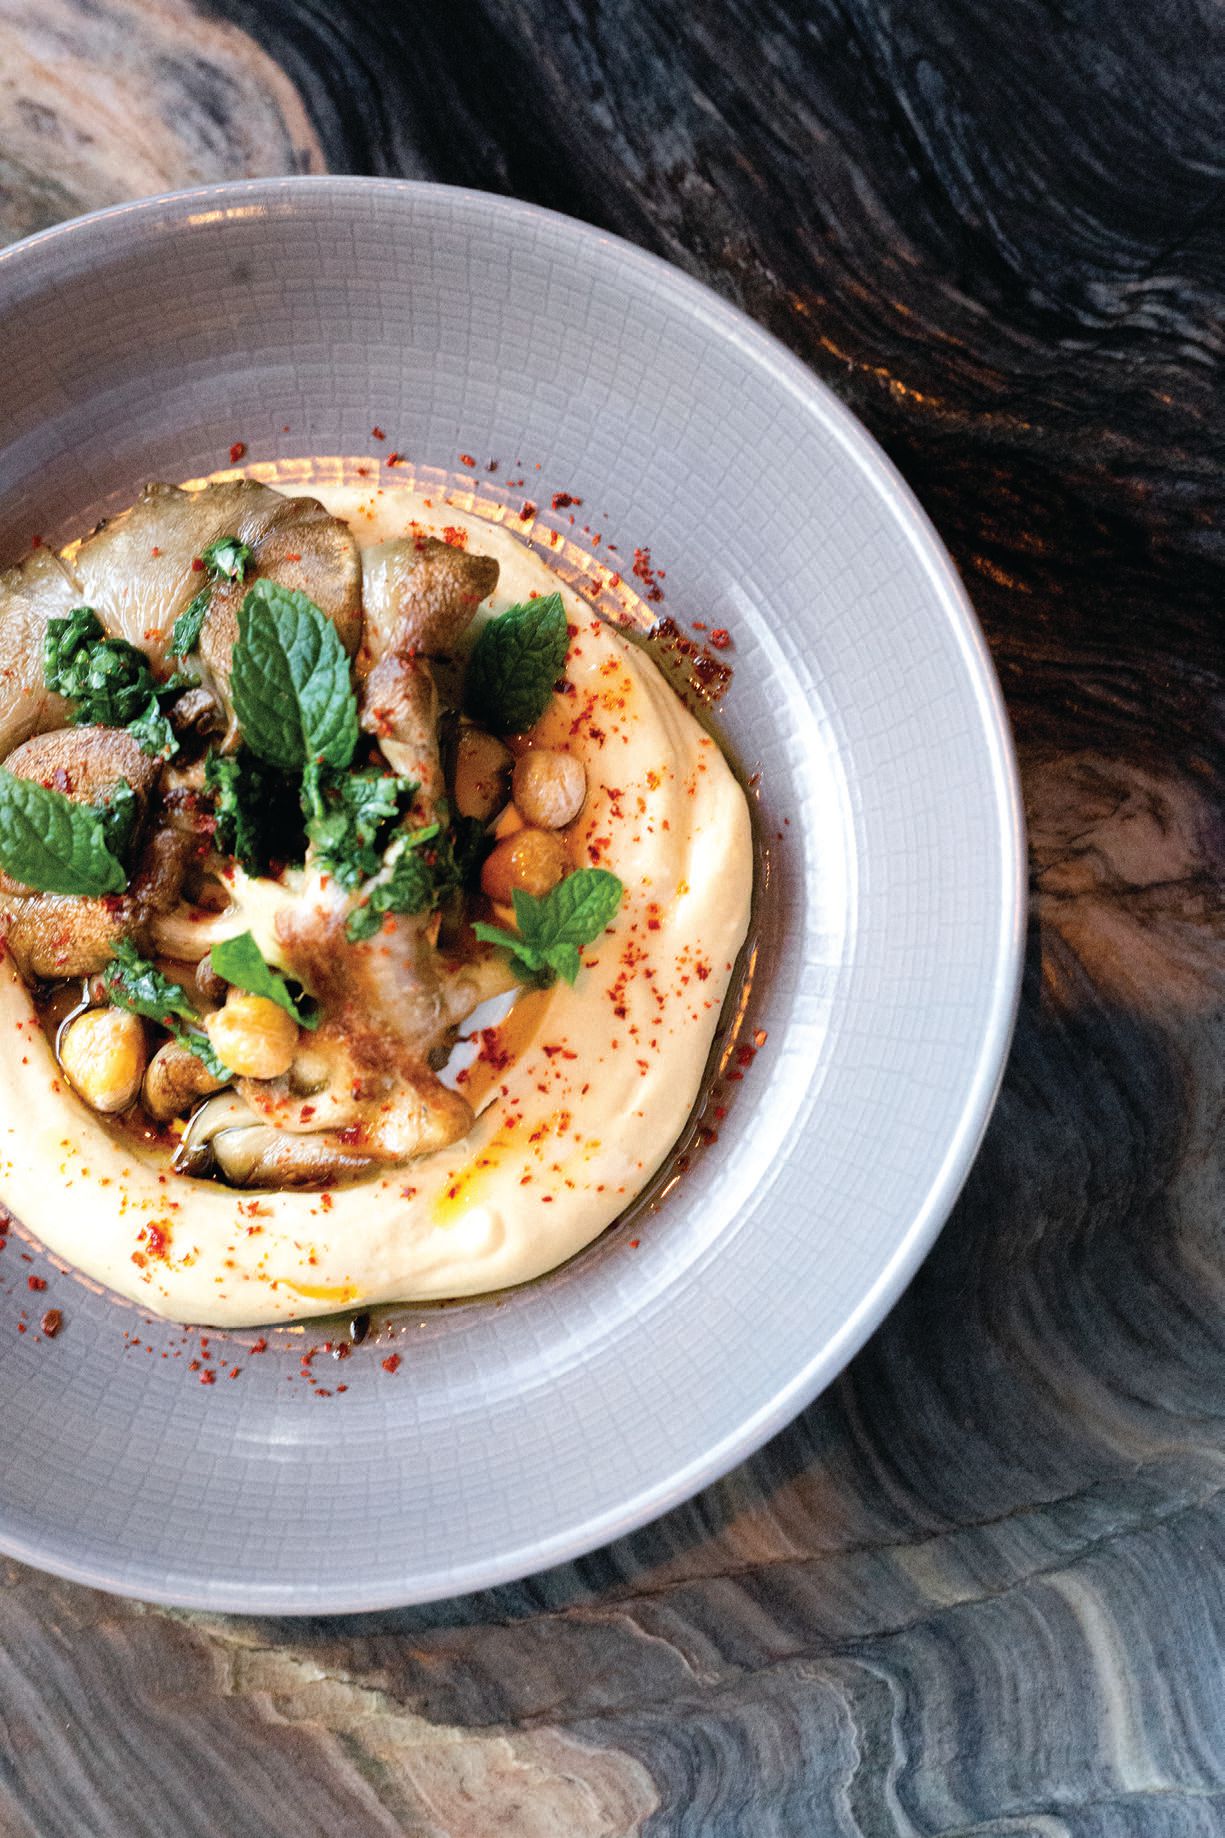 The artful chickpea puree from chef Brian Redzikowski at Little Italy’s Kettner Exchange PHOTO BY JOANN VAN NOY